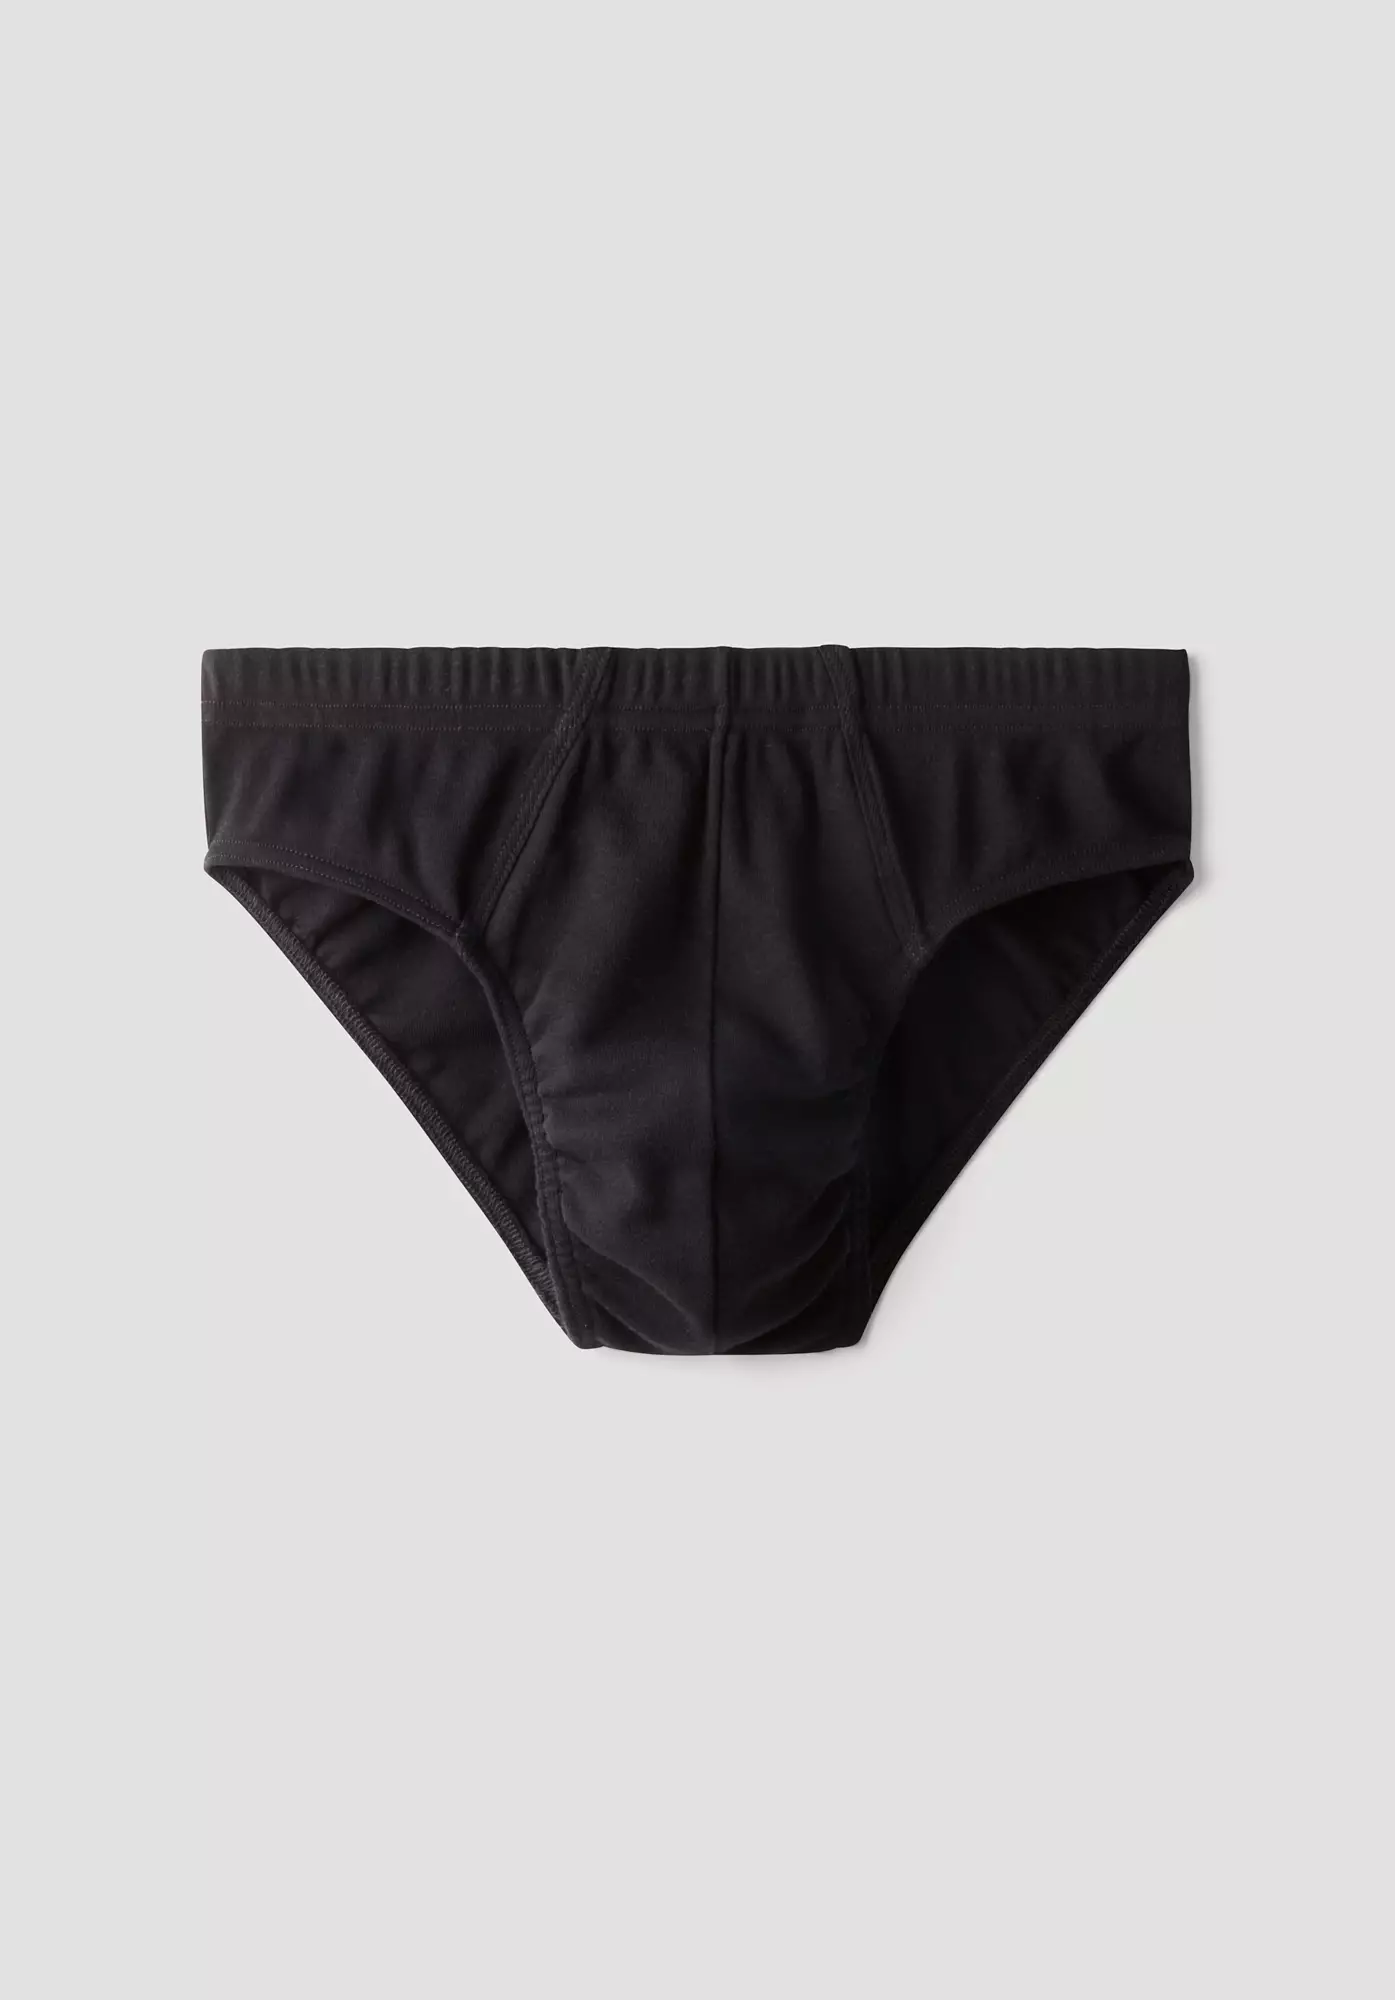 PureDAILY briefs in a set of 2 made of pure organic cotton - 2